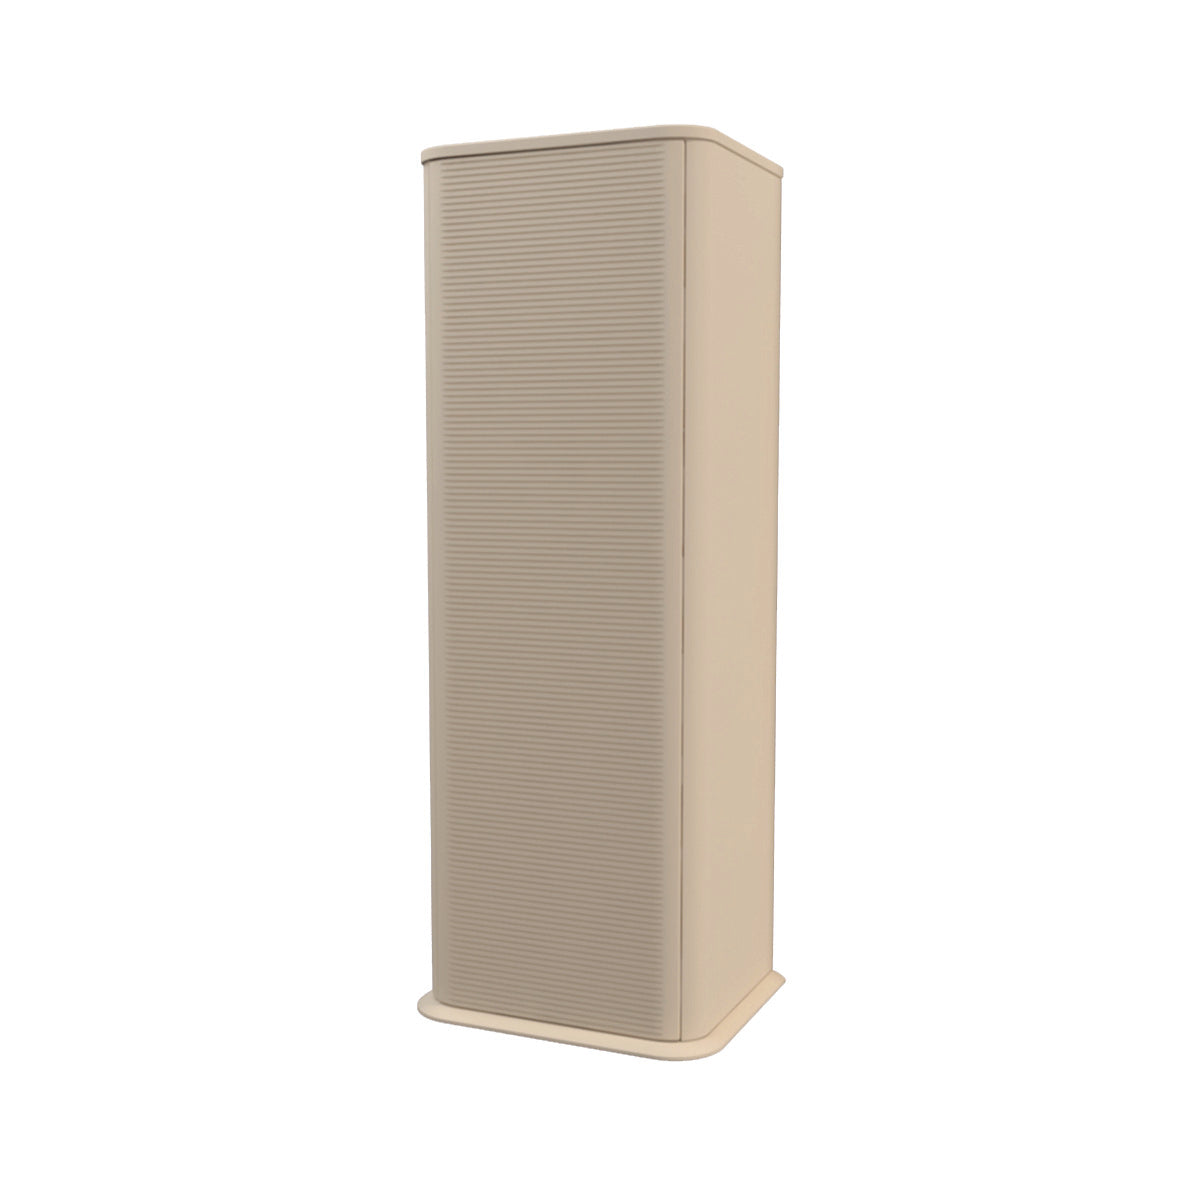 BH Idra Linen Cabinet 48" with Fluted Design